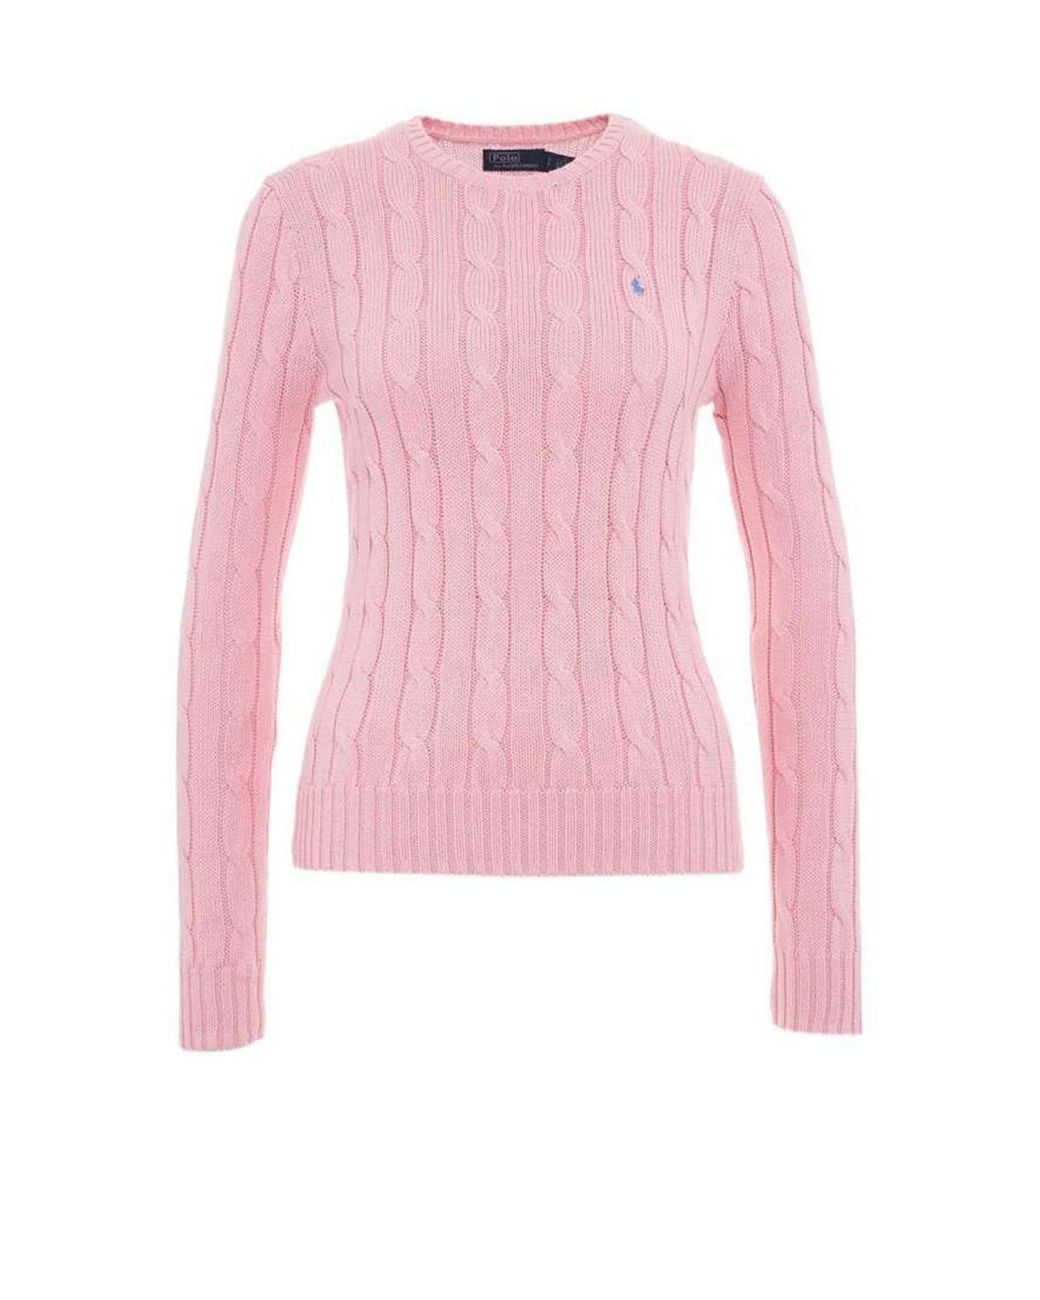 Polo Ralph Lauren Cable-knit Crewneck Sweater in Pink | Lyst